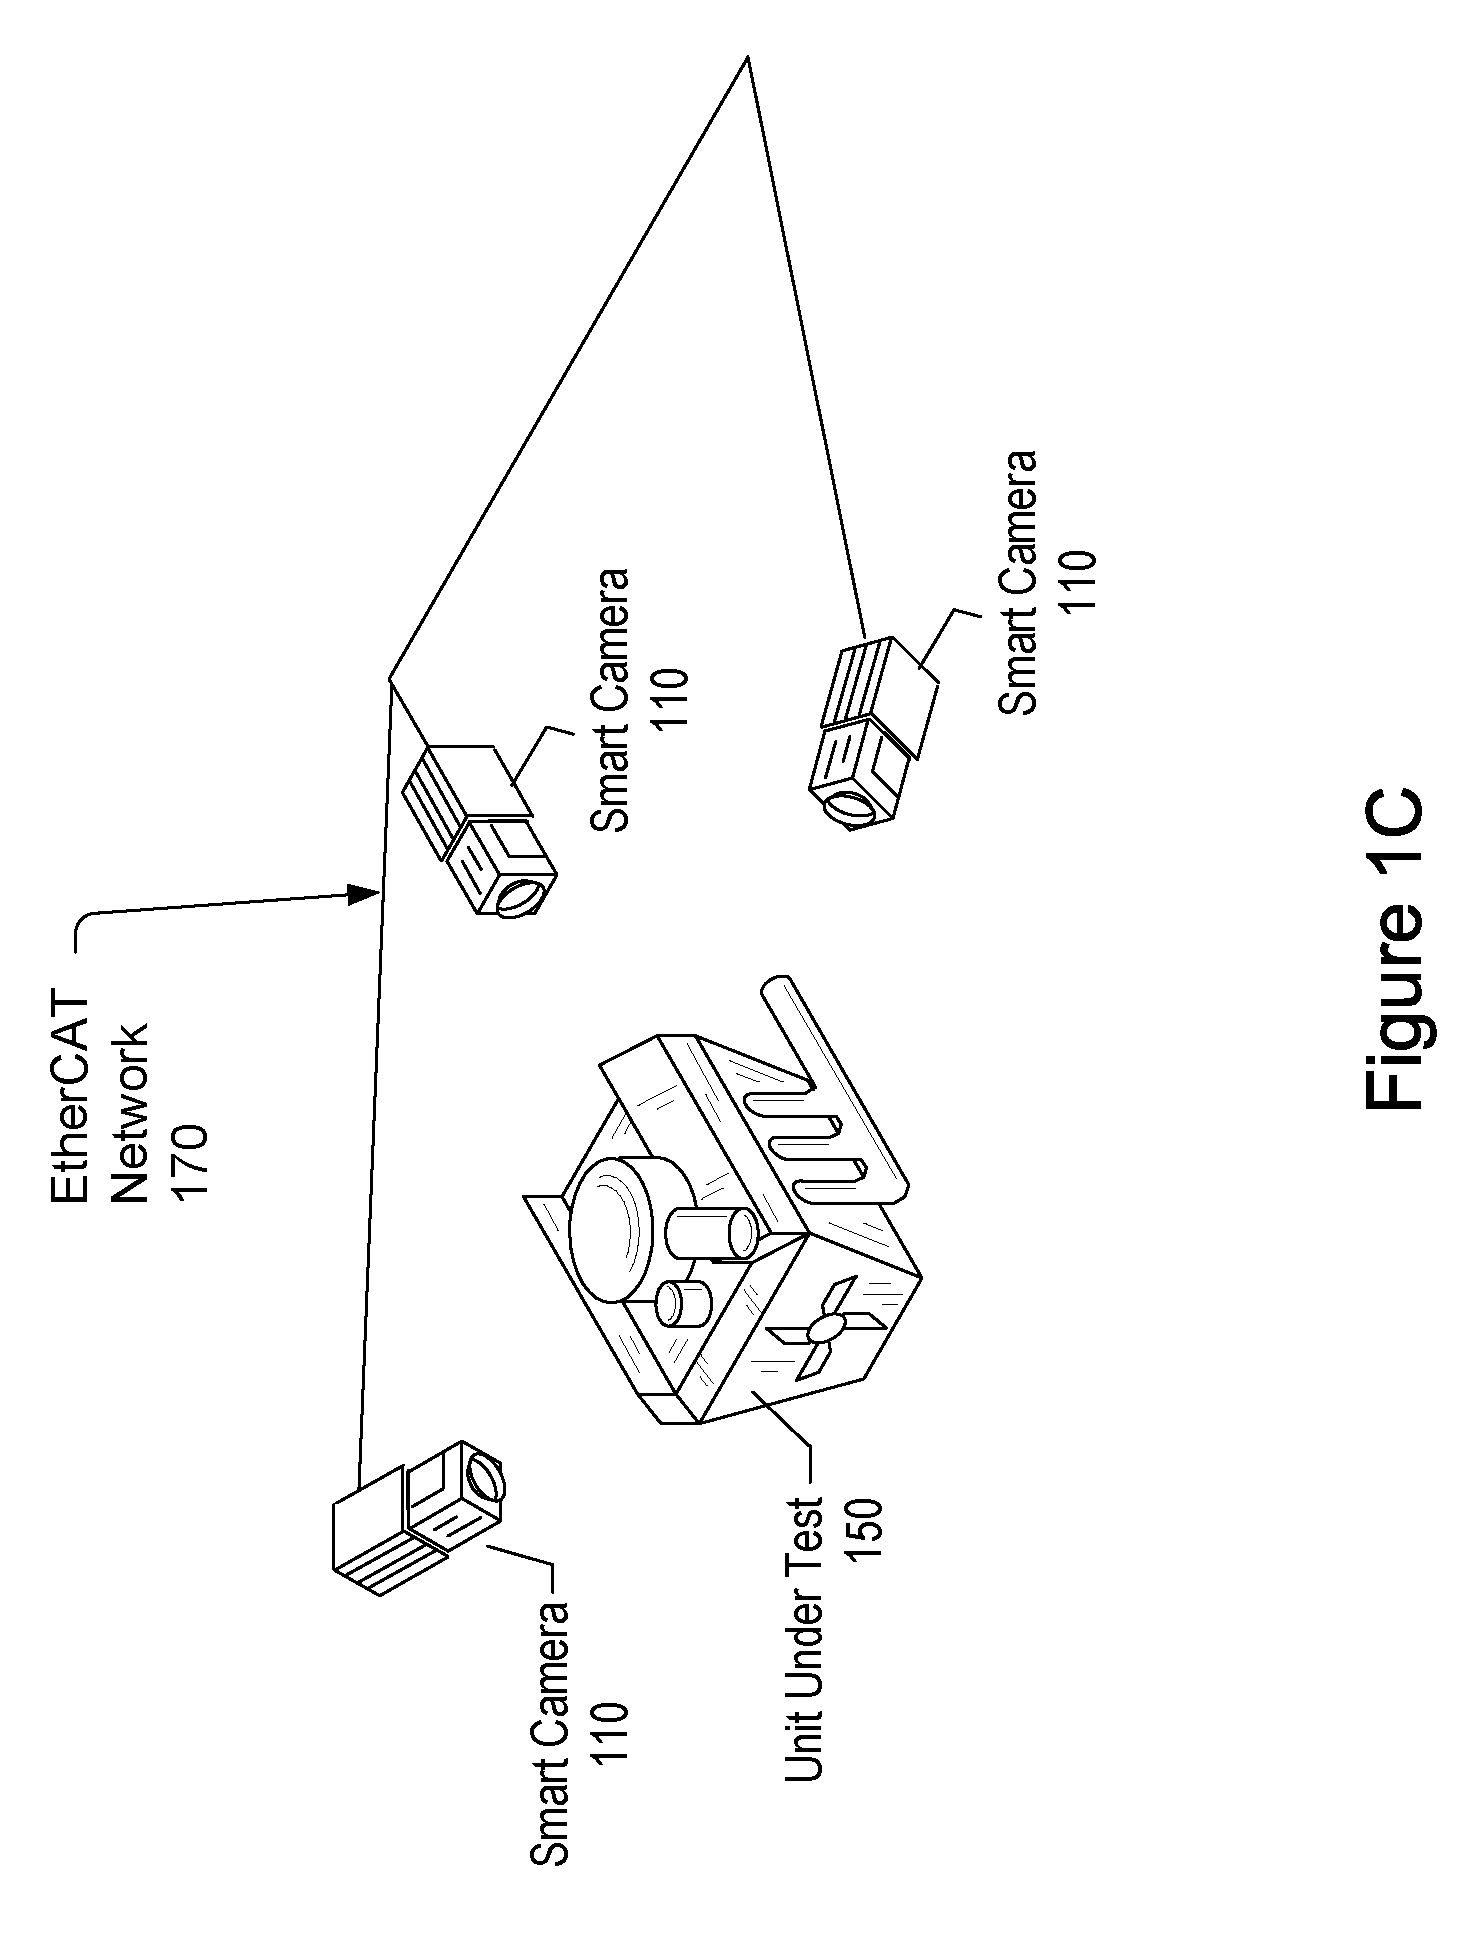 Vision system with deterministic low-latency communication